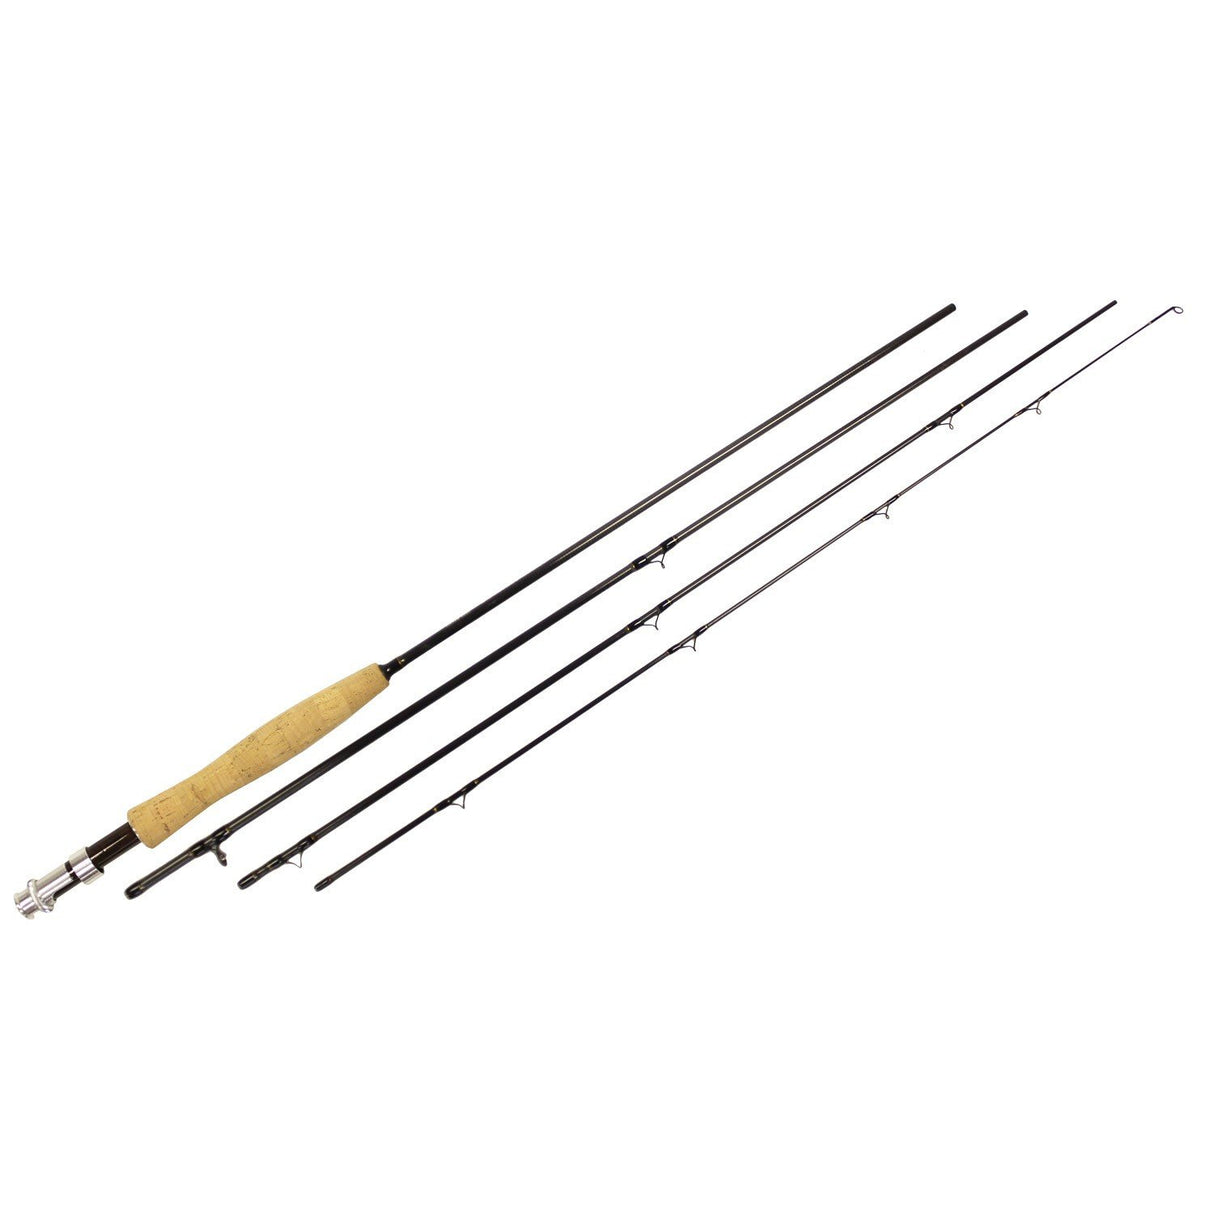 SHU-FLY 9'0 4 PIECE FLY ROD FOR 3 WEIGHT